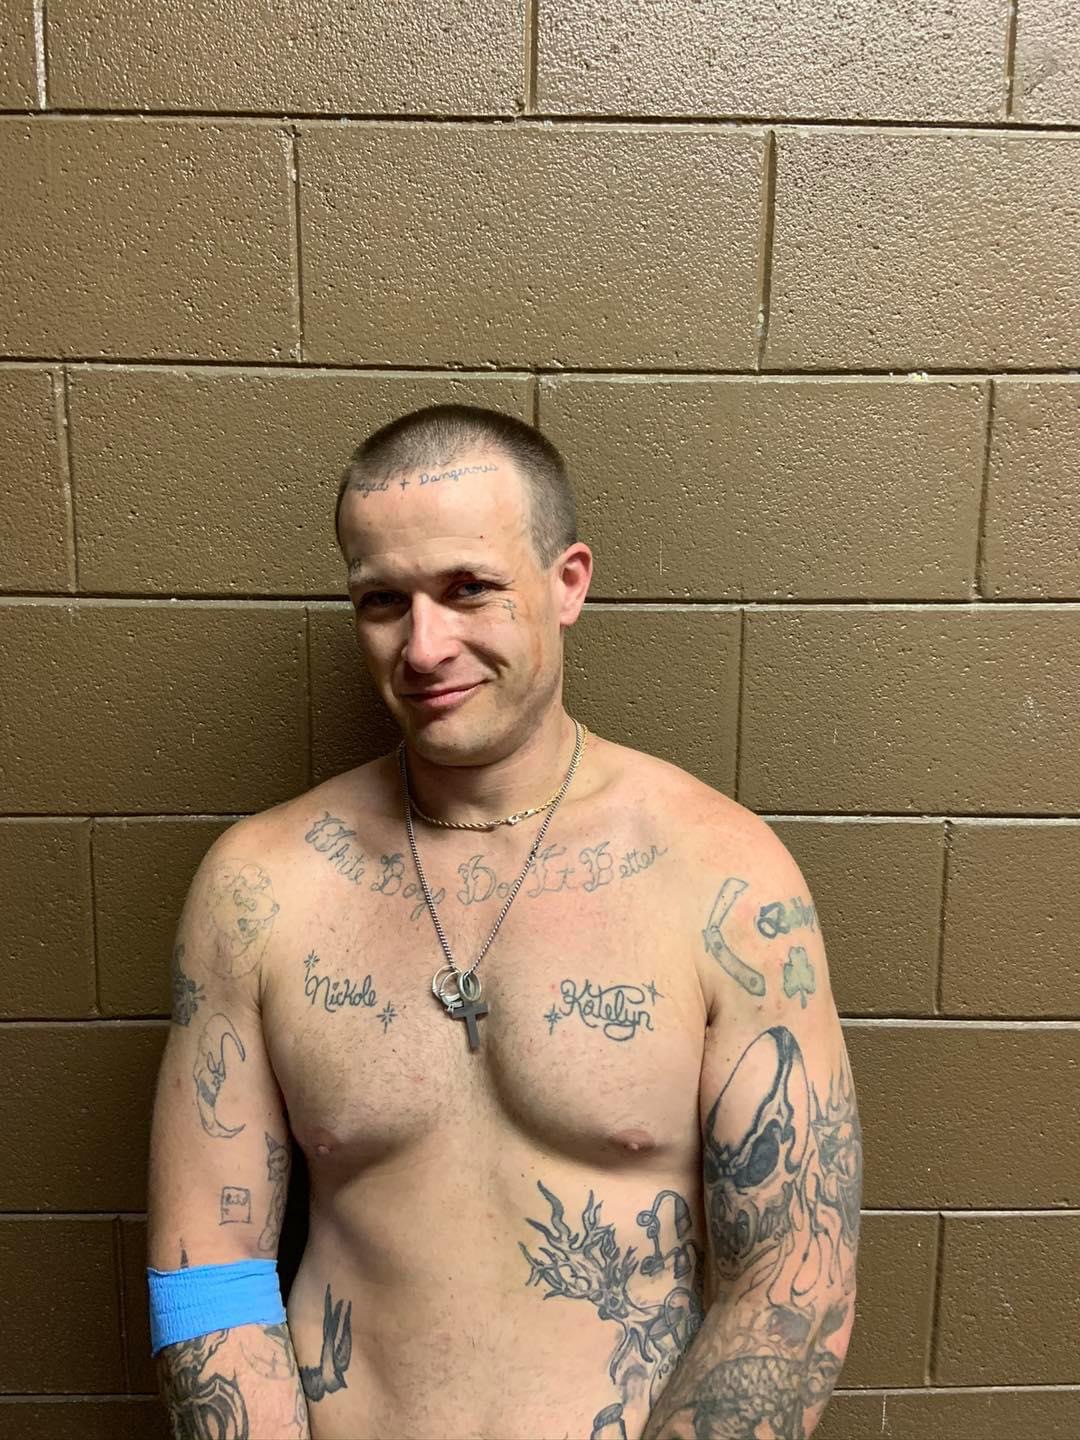 UPDATE: Jail escapee captured in Floyd County